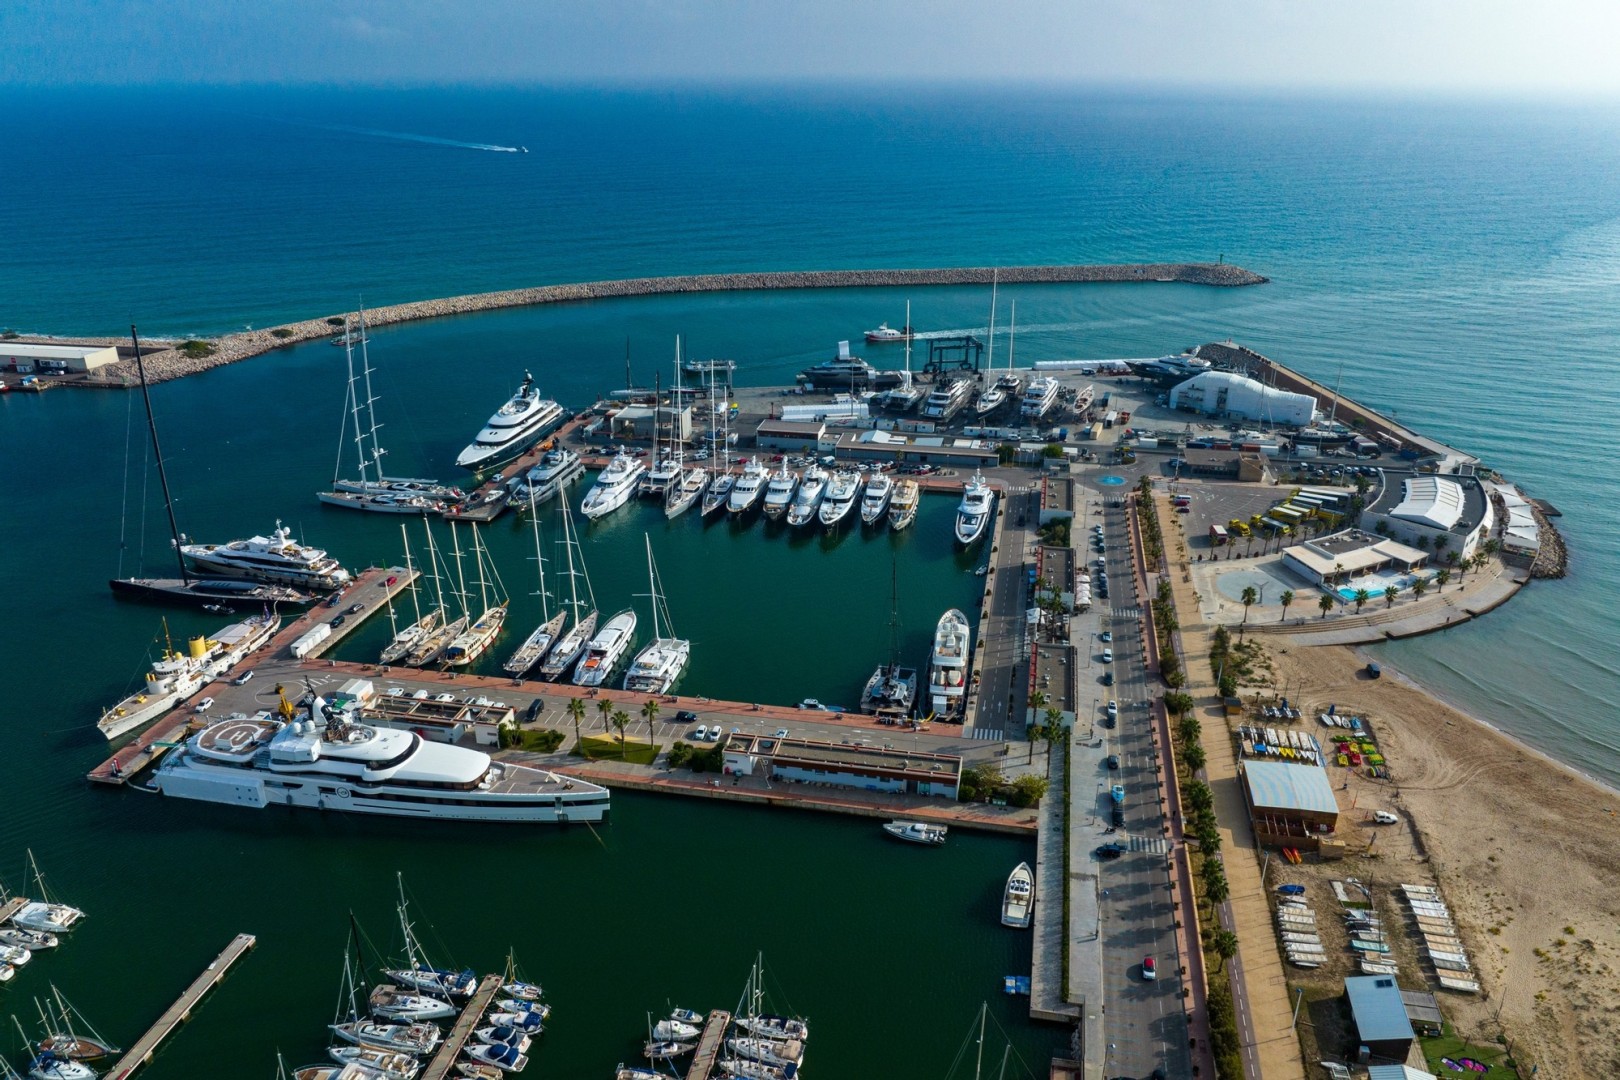 Two months before the America’s Cup descends on the Vilanova i La Geltrú